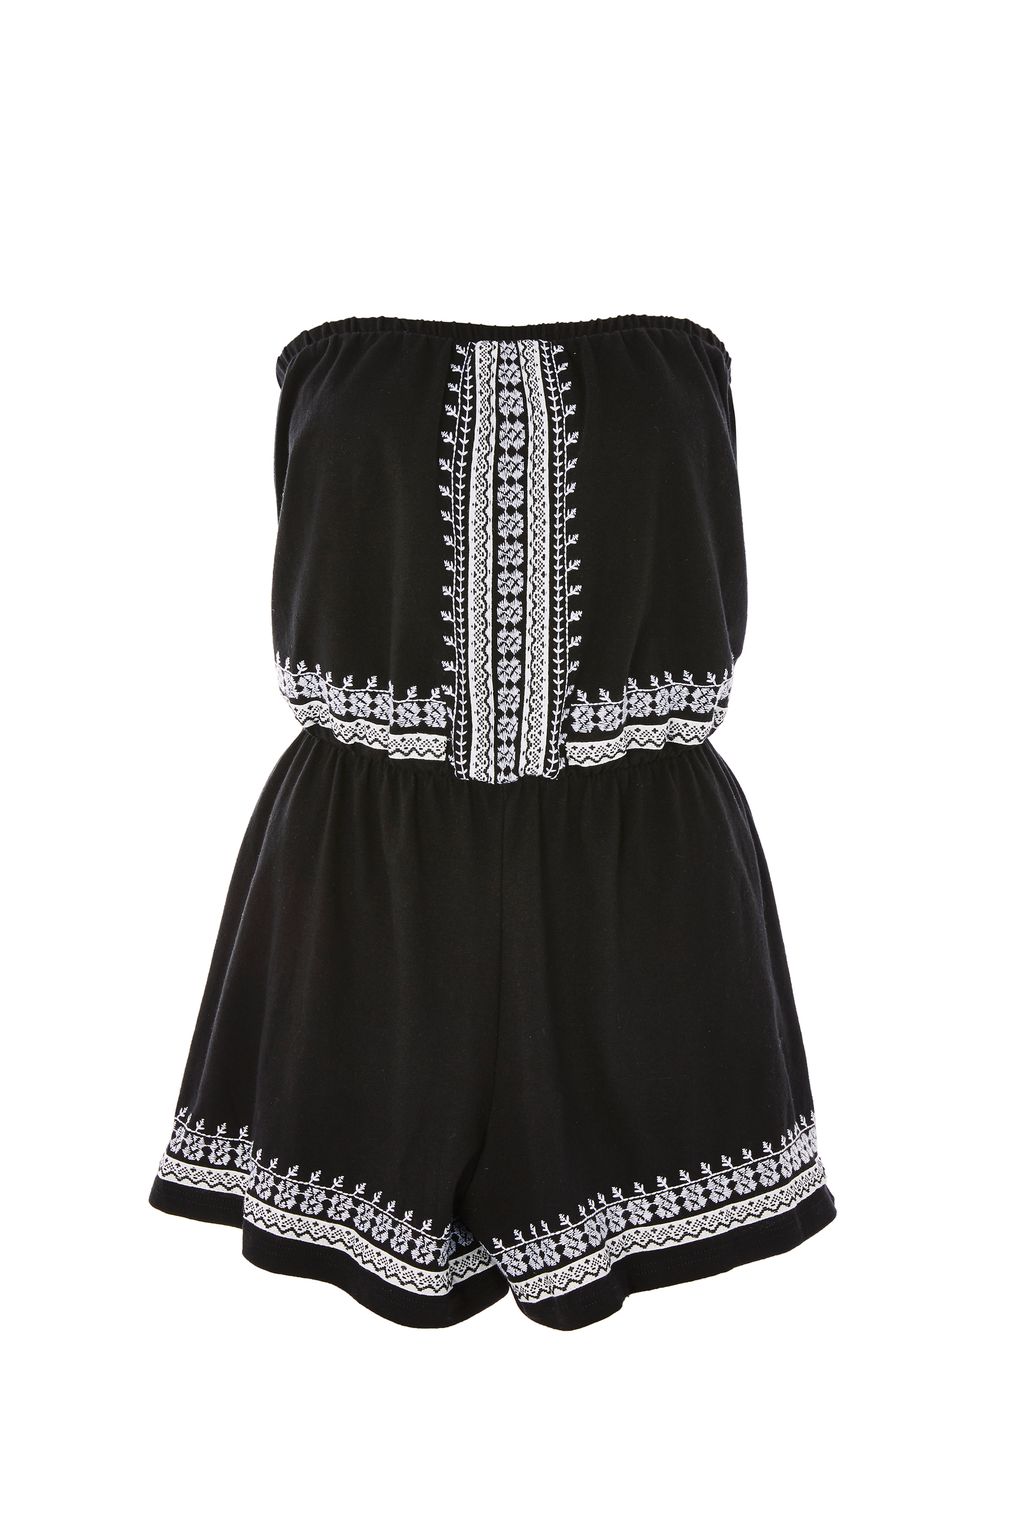 PETITE Embroidered Bandeau Playsuit, Topshop, €36